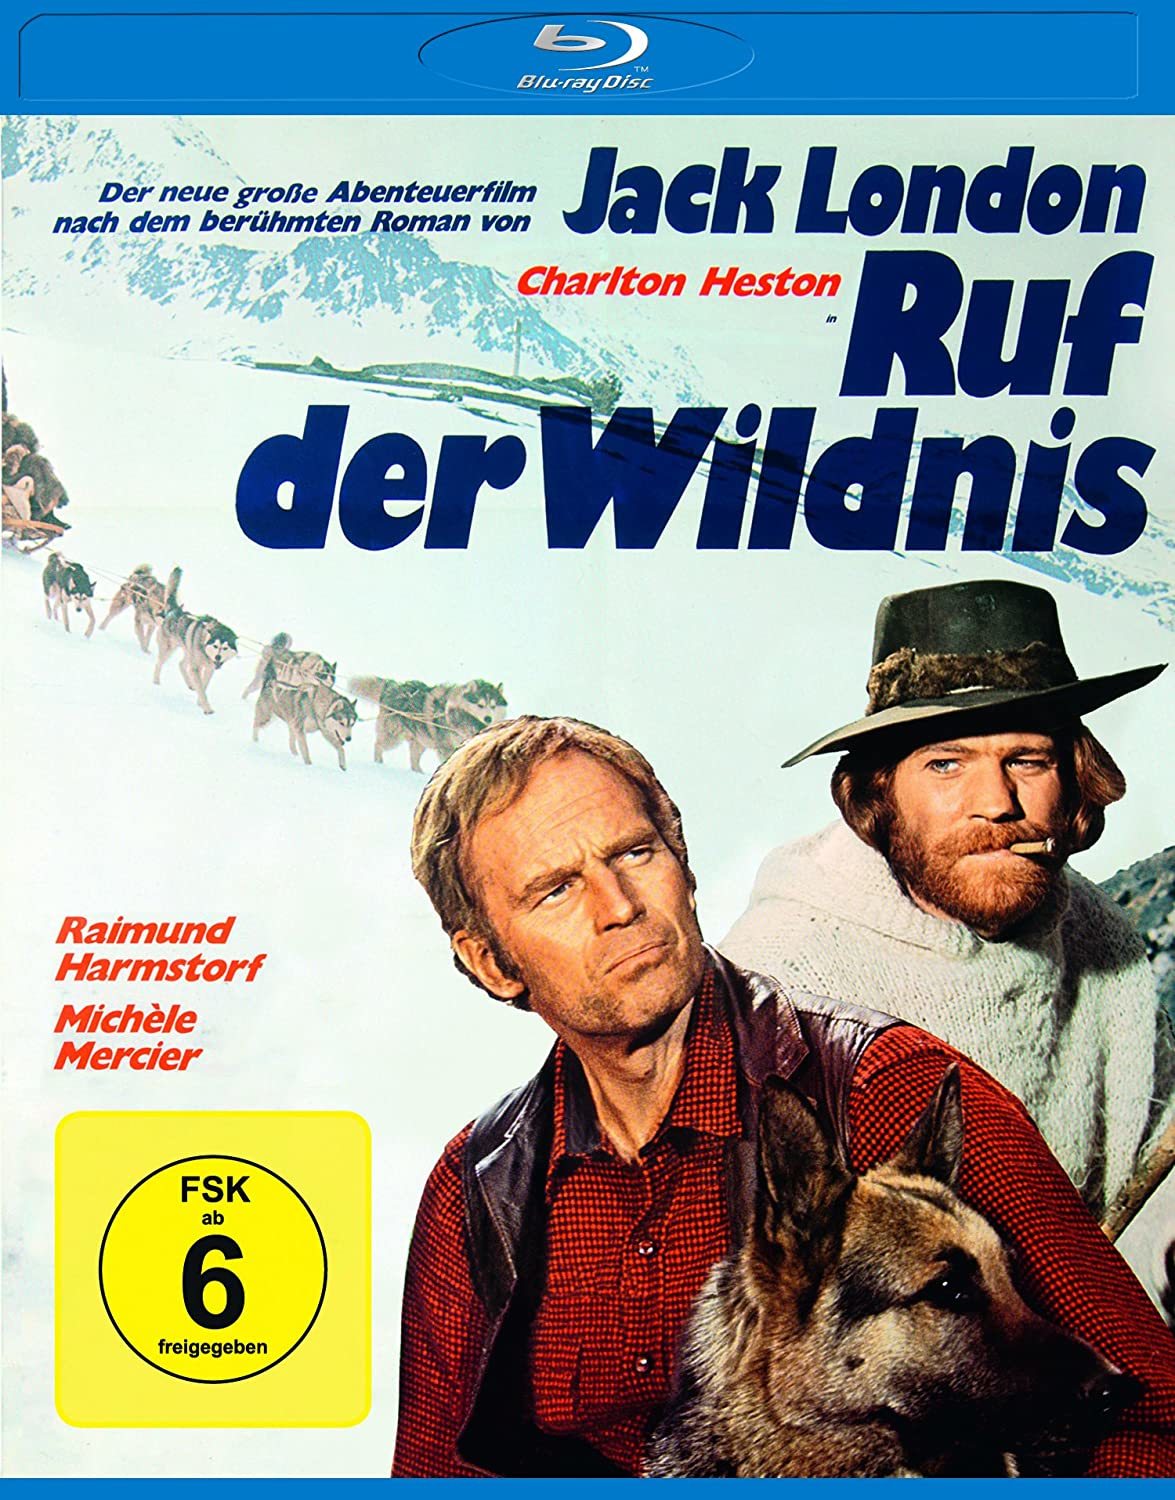 The call of the wild (1972 film)